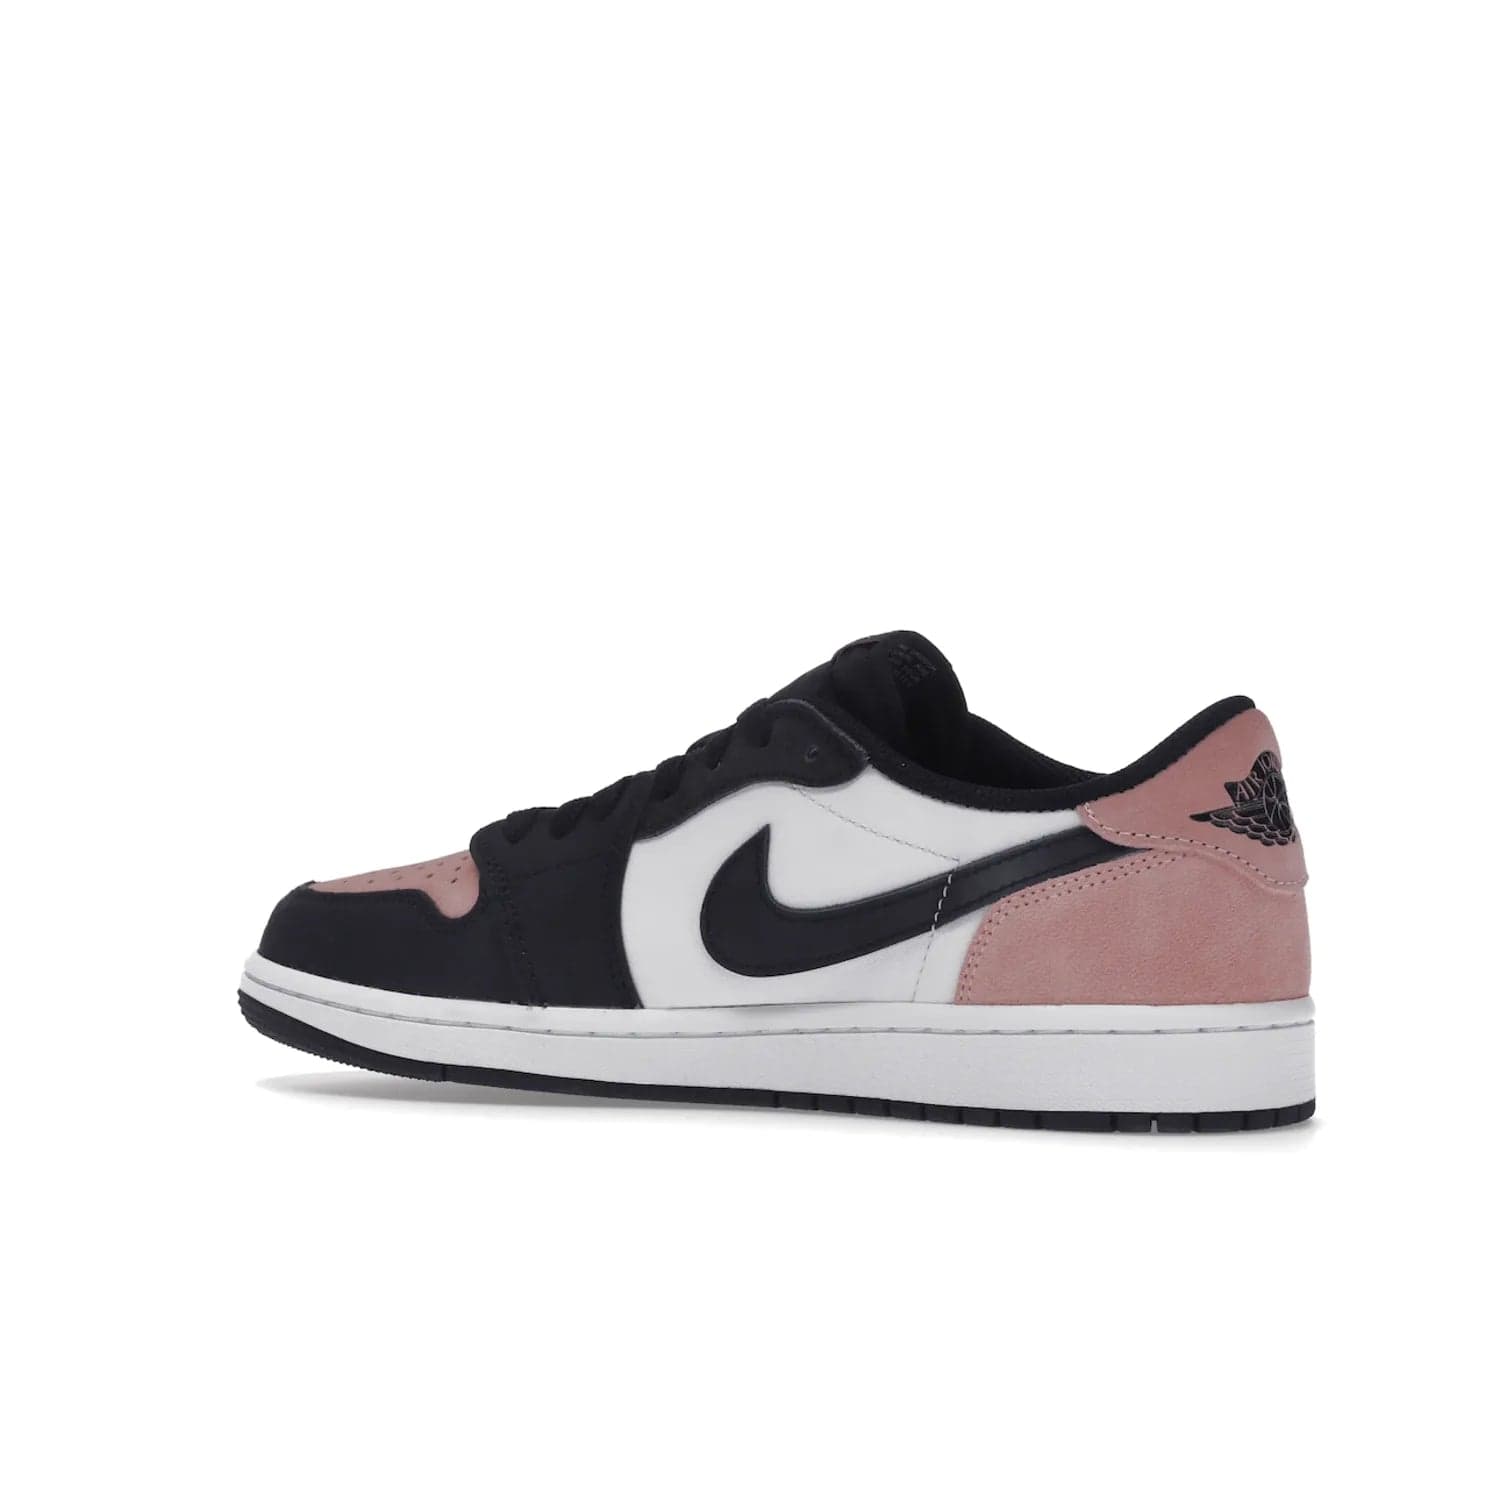 Jordan 1 Low OG Bleached Coral - Image 22 - Only at www.BallersClubKickz.com - Introducing the Air Jordan 1 Low OG Bleached Coral. Constructed with white leather, black cracked leather & Bleached Coral suede. Signature Jordan Wings logo, white Air sole. Get the pack in July 2022 and stand out.